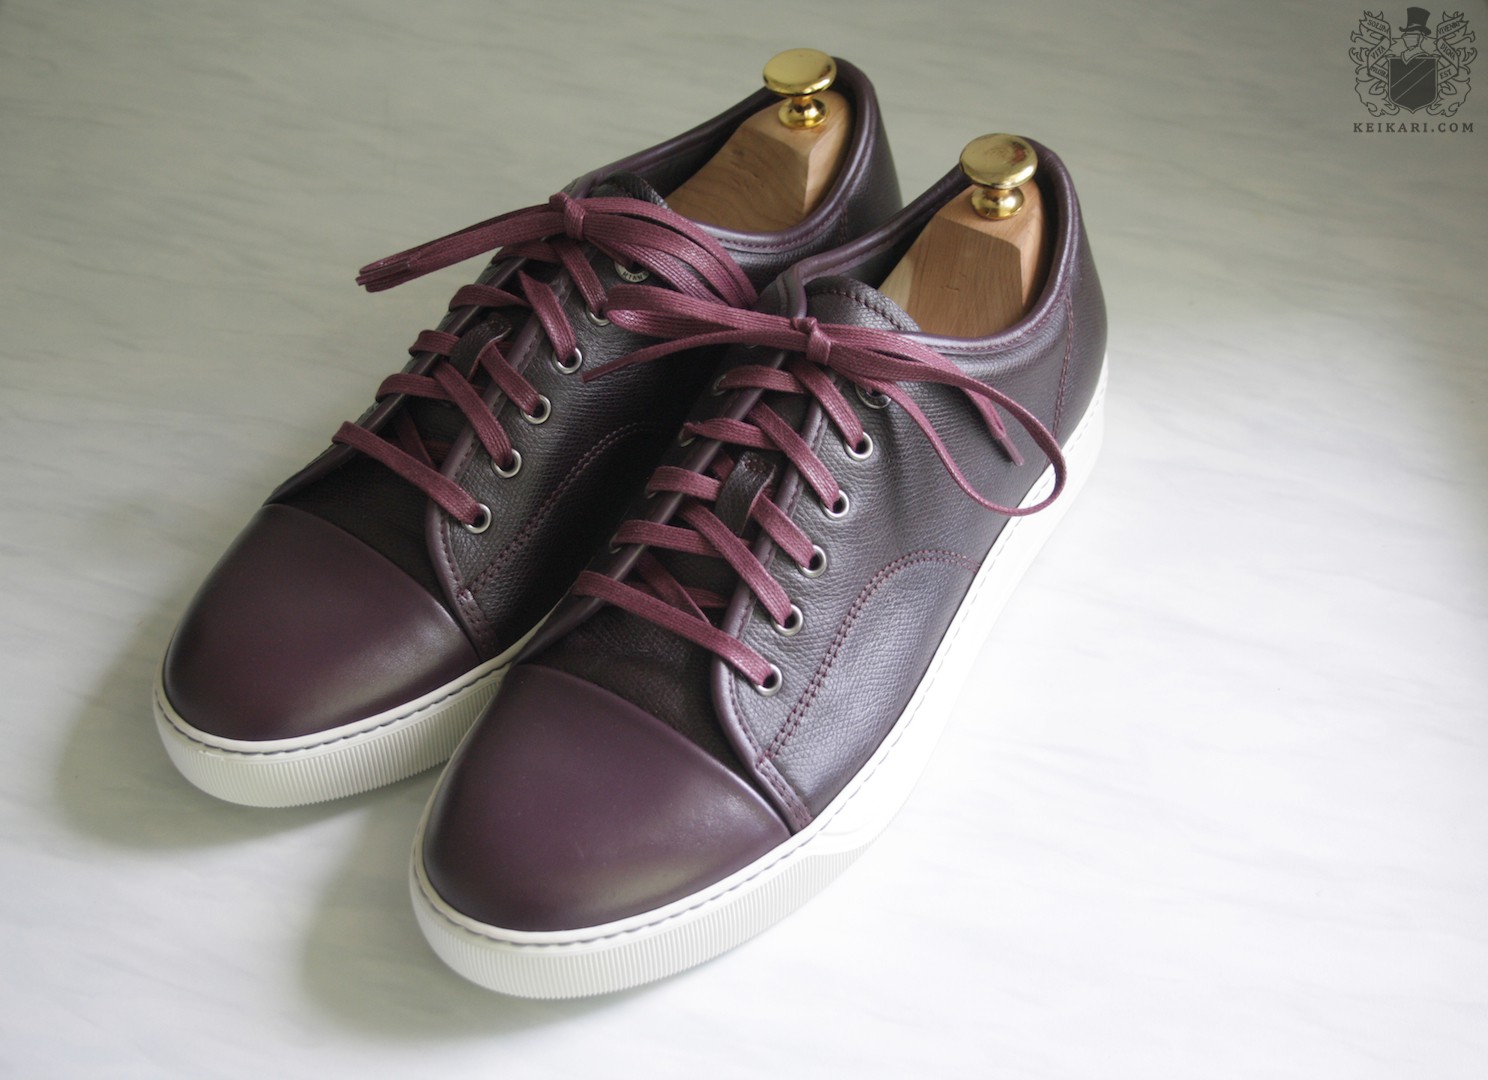 Anatomy and review of Lanvin sneakers 